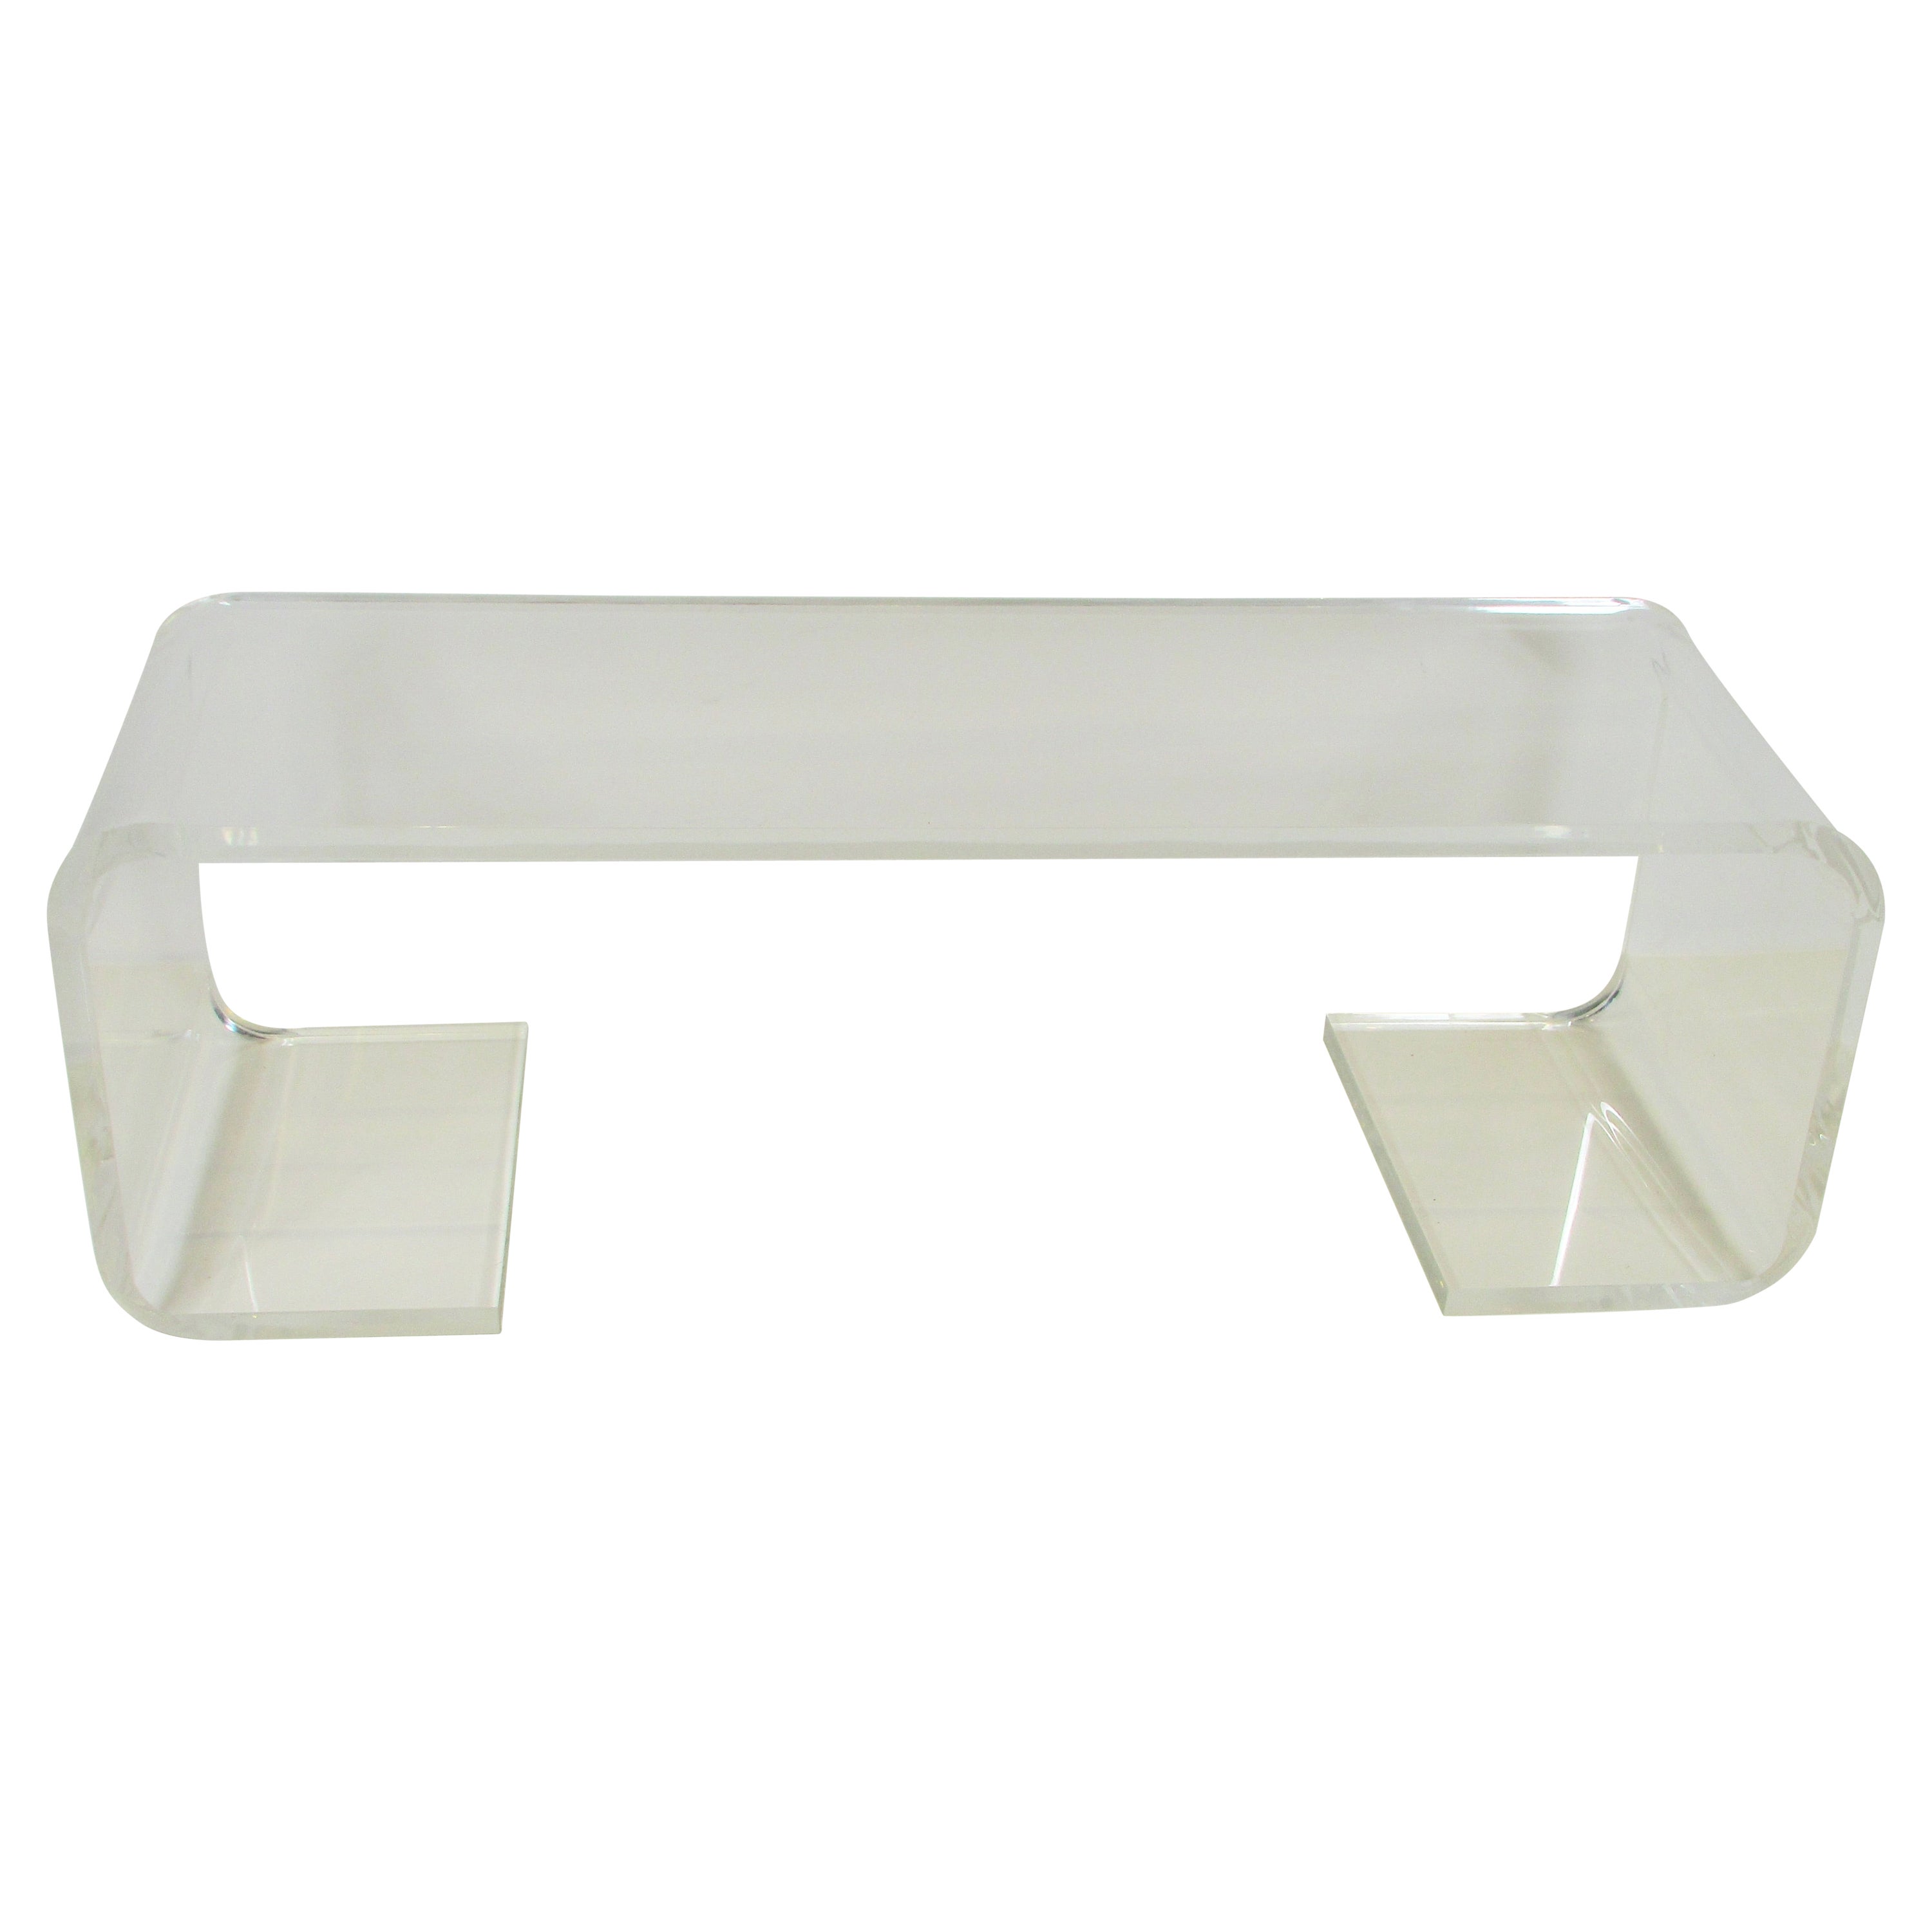 Large thick Lucite coffee table or bench For Sale